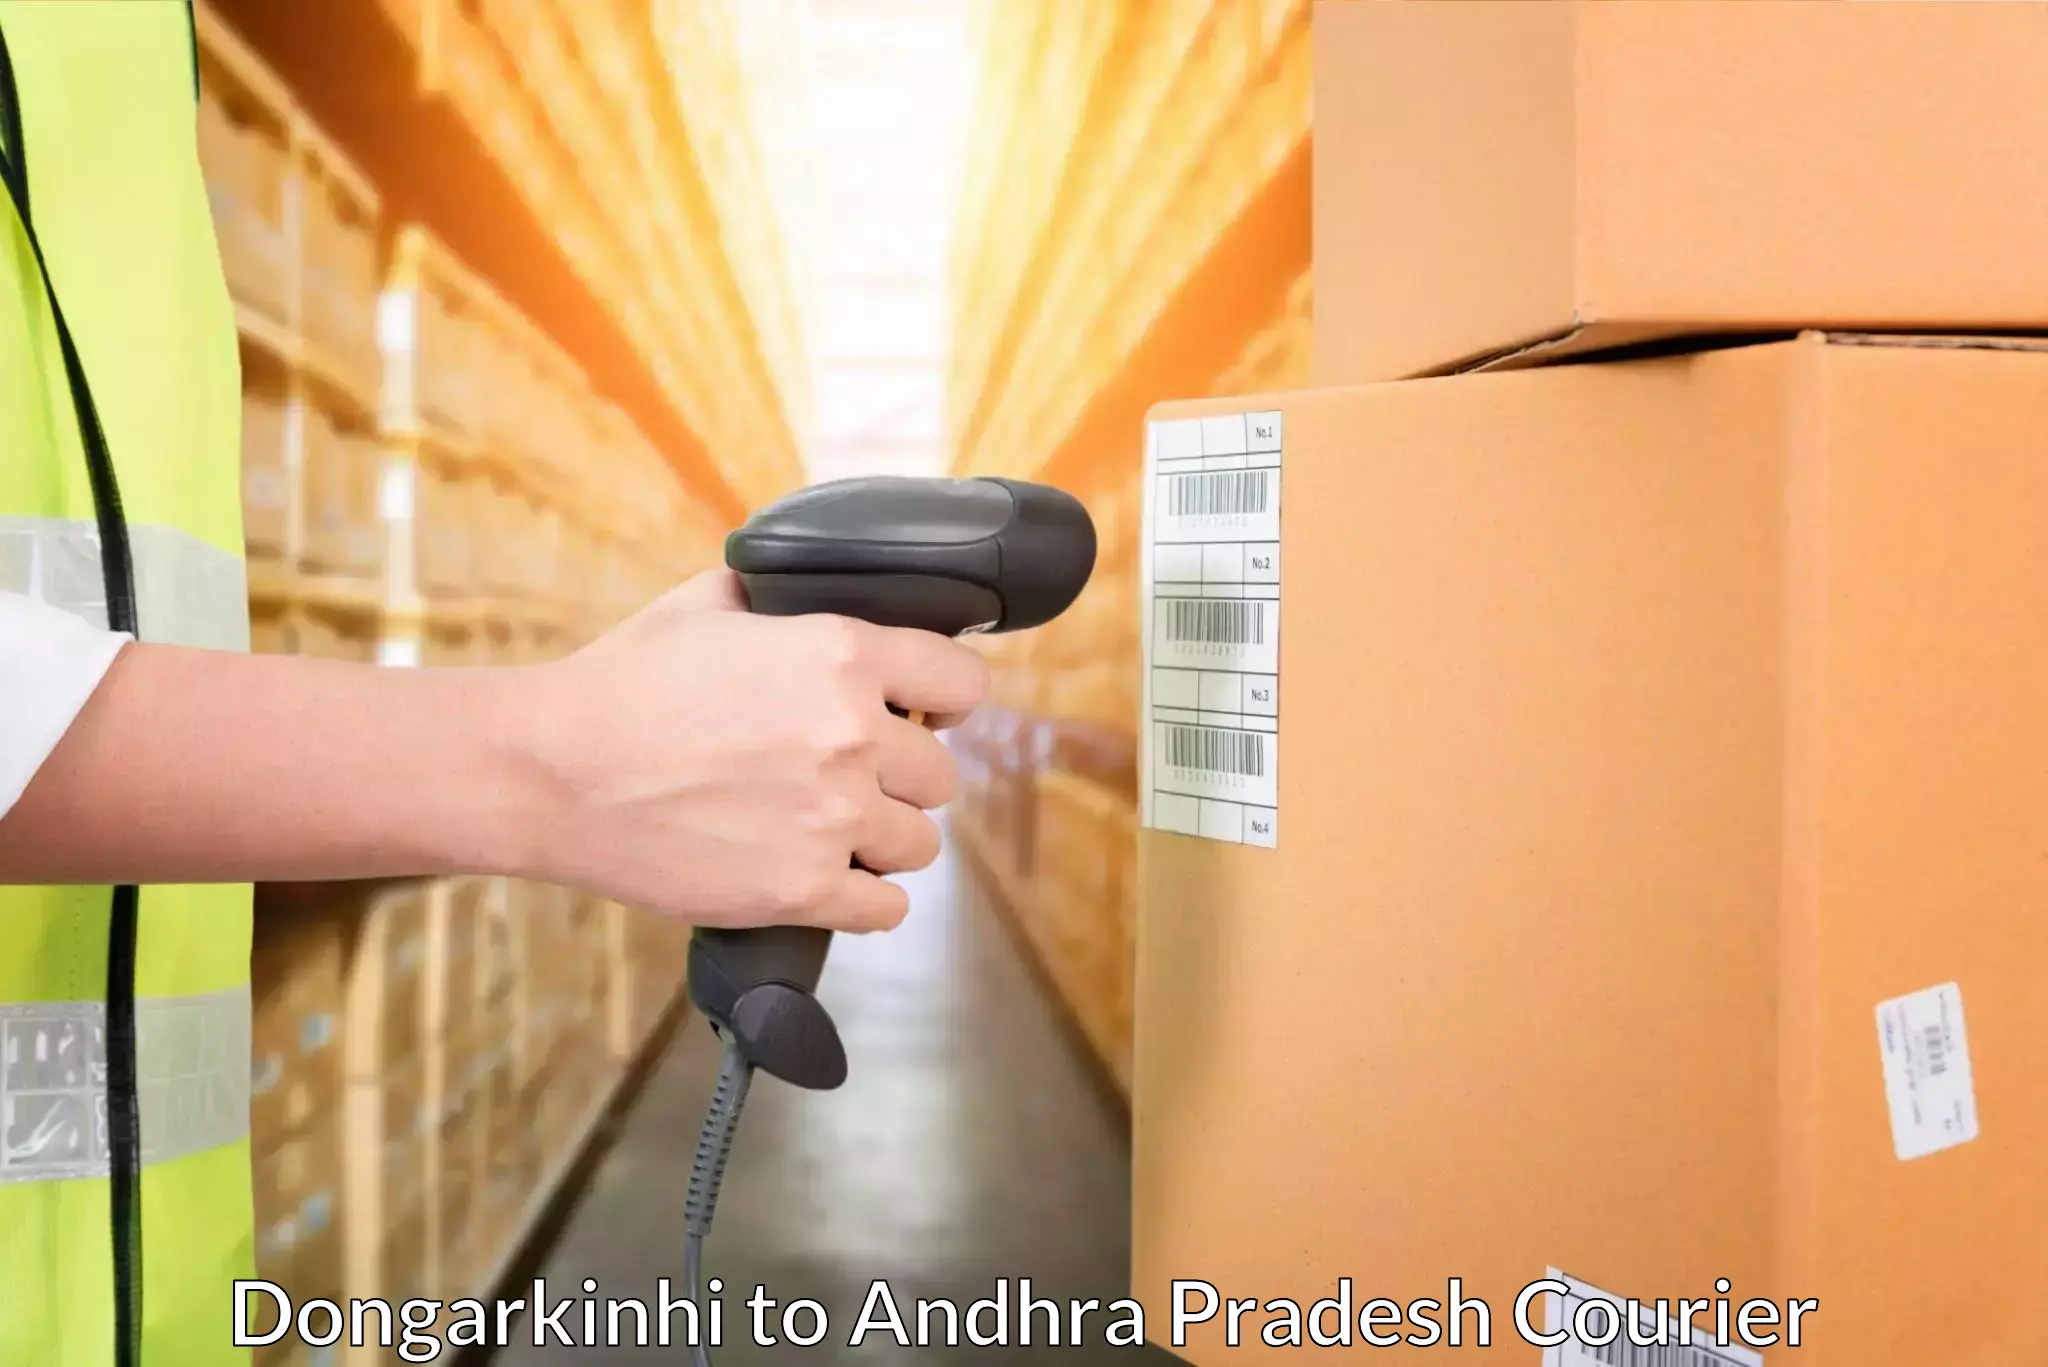 Easy access courier services Dongarkinhi to Andhra Pradesh